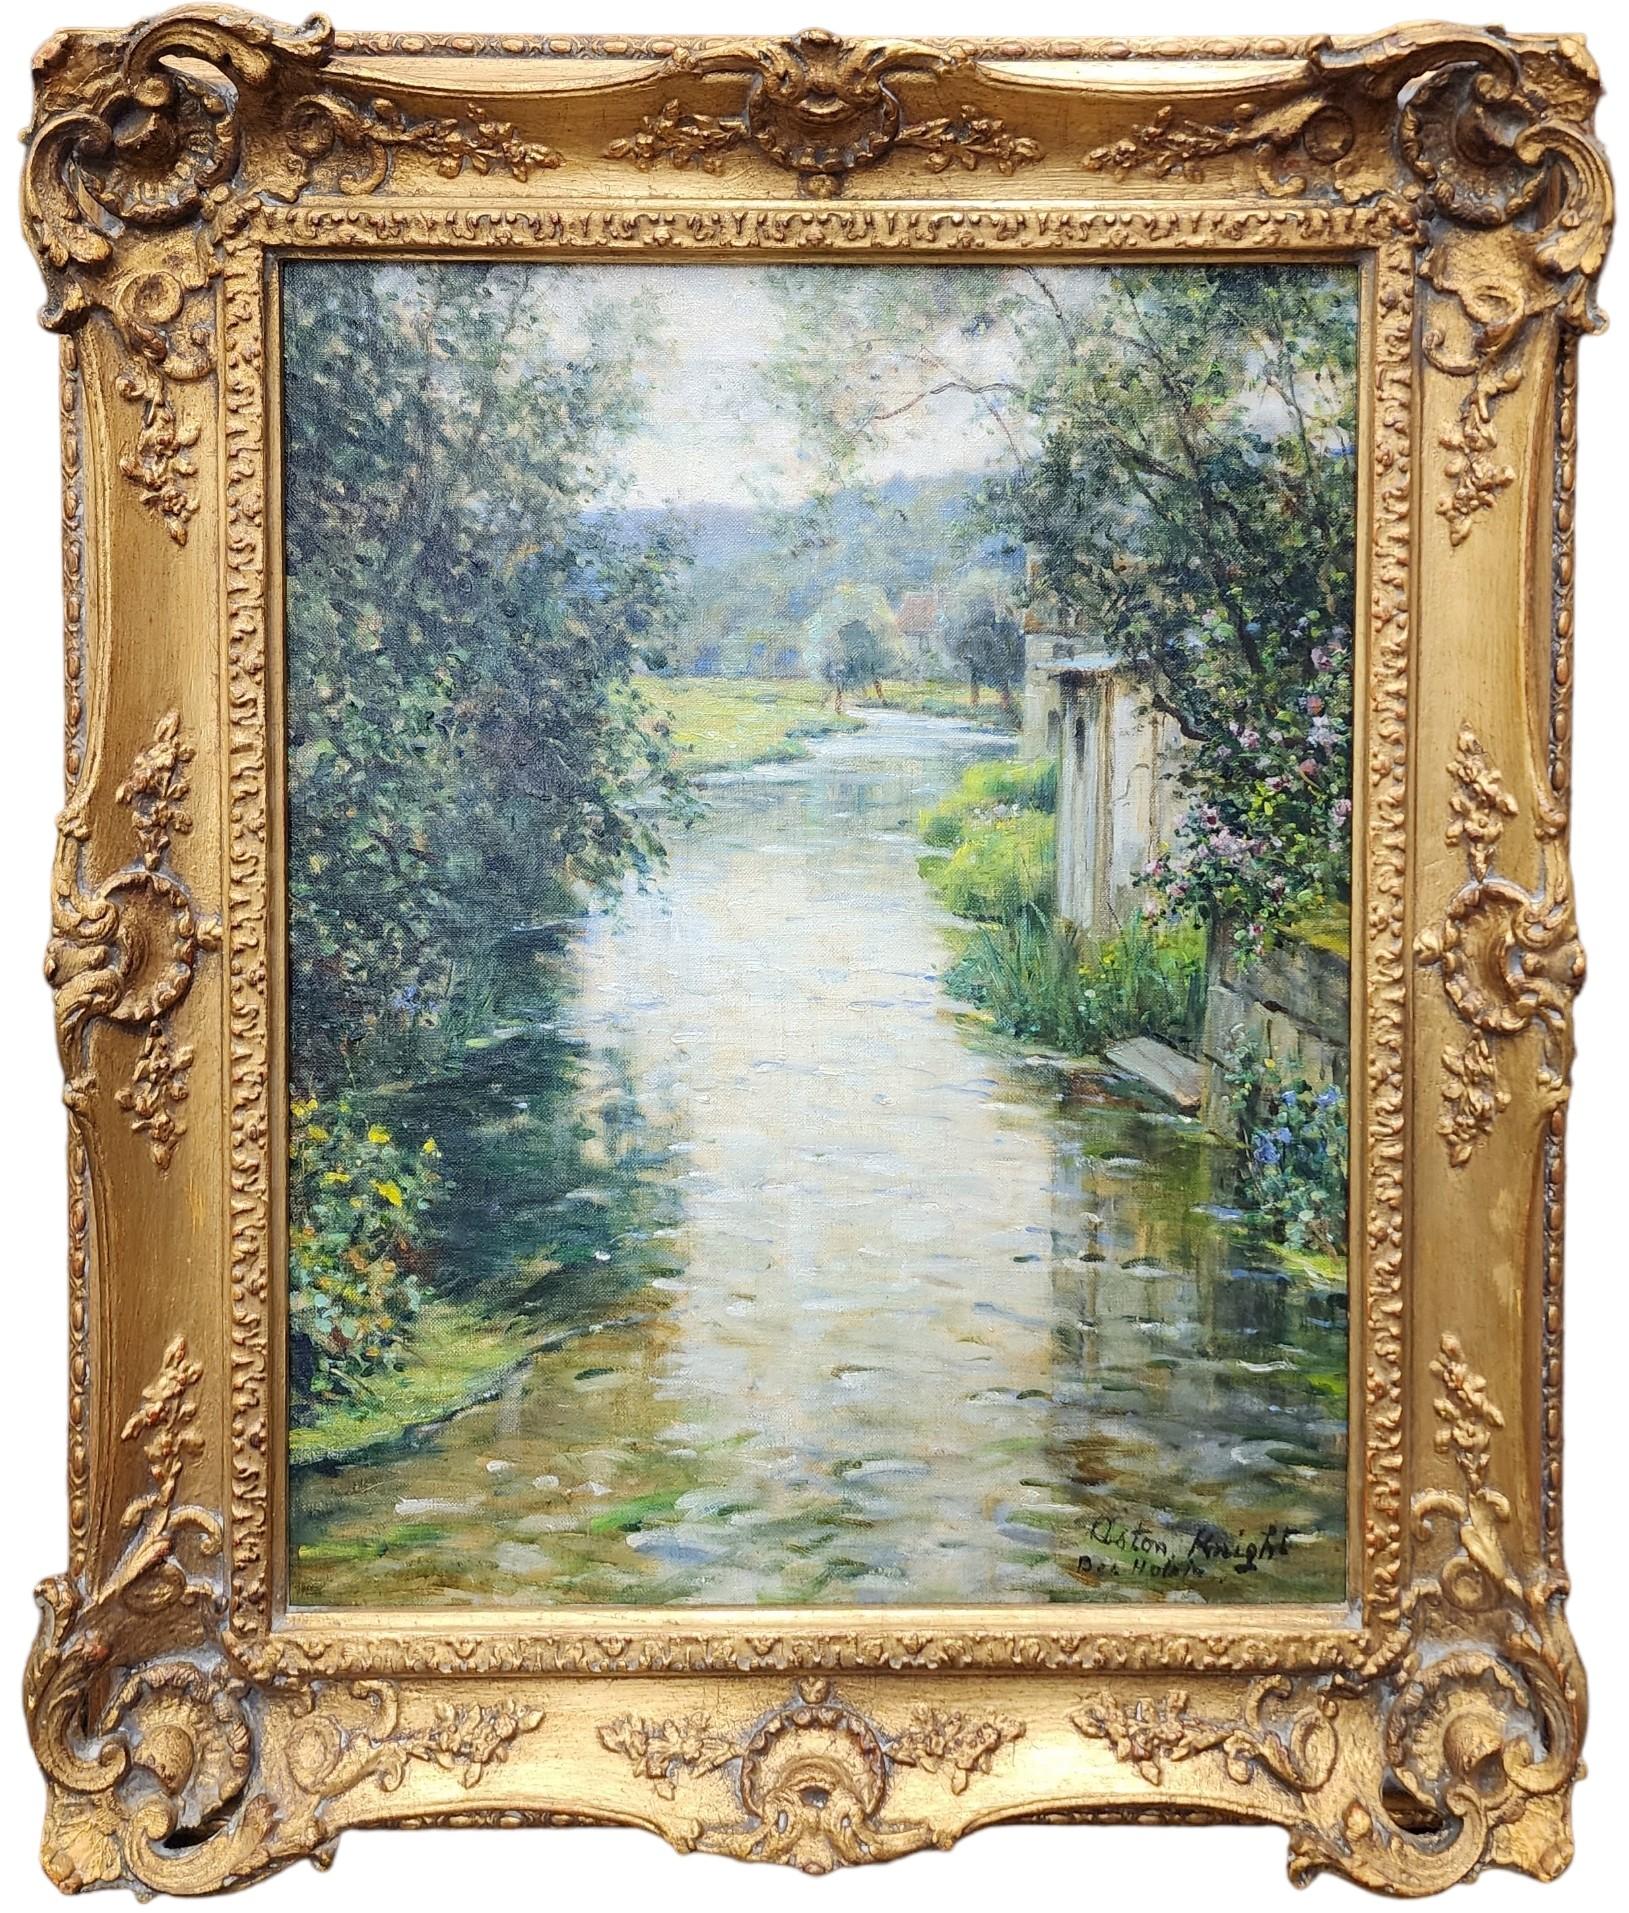 Louis Aston Knight (French/American, 1873-1948)

Signed: Aston Knight (Lower, Right)

" River in France ", circa 1920

Oil on Canvas

21 3/4" x 18"

Housed in a 3 1/2" Ornamented Frame

Overall Size: 28" x 24 1/4"
